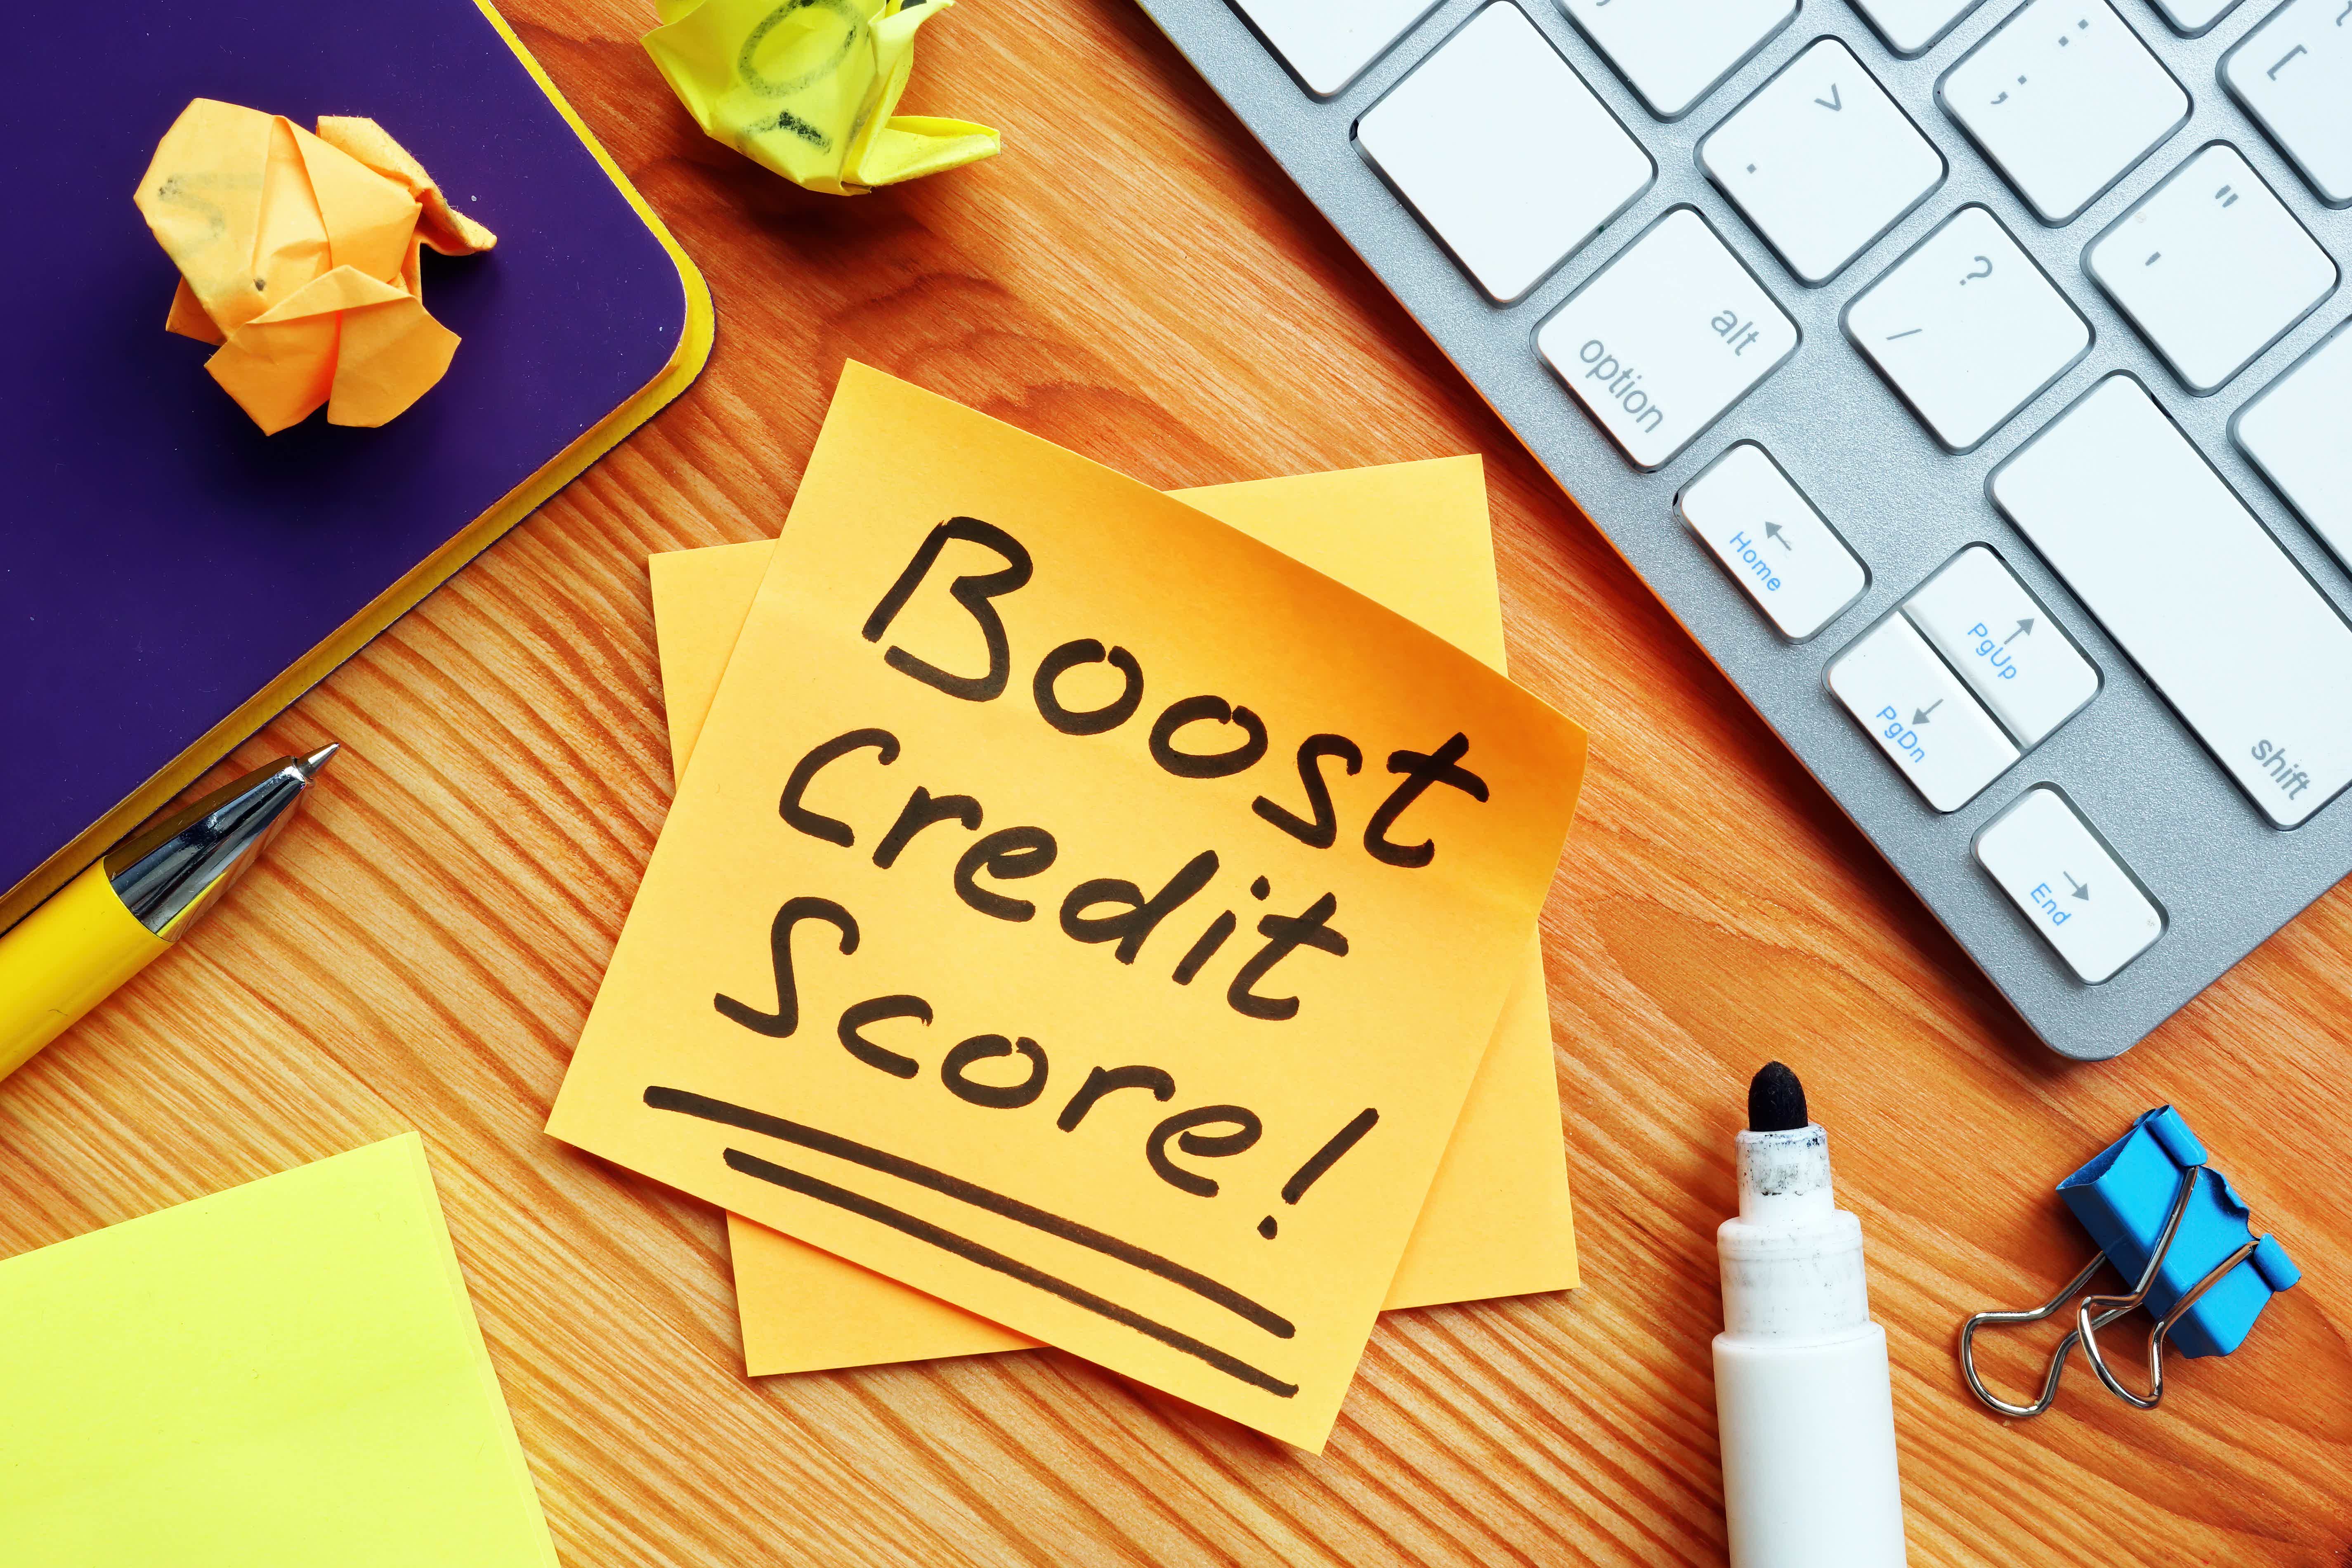  Learn all about how to get an 800 credit score! Source: Adobe Stock.